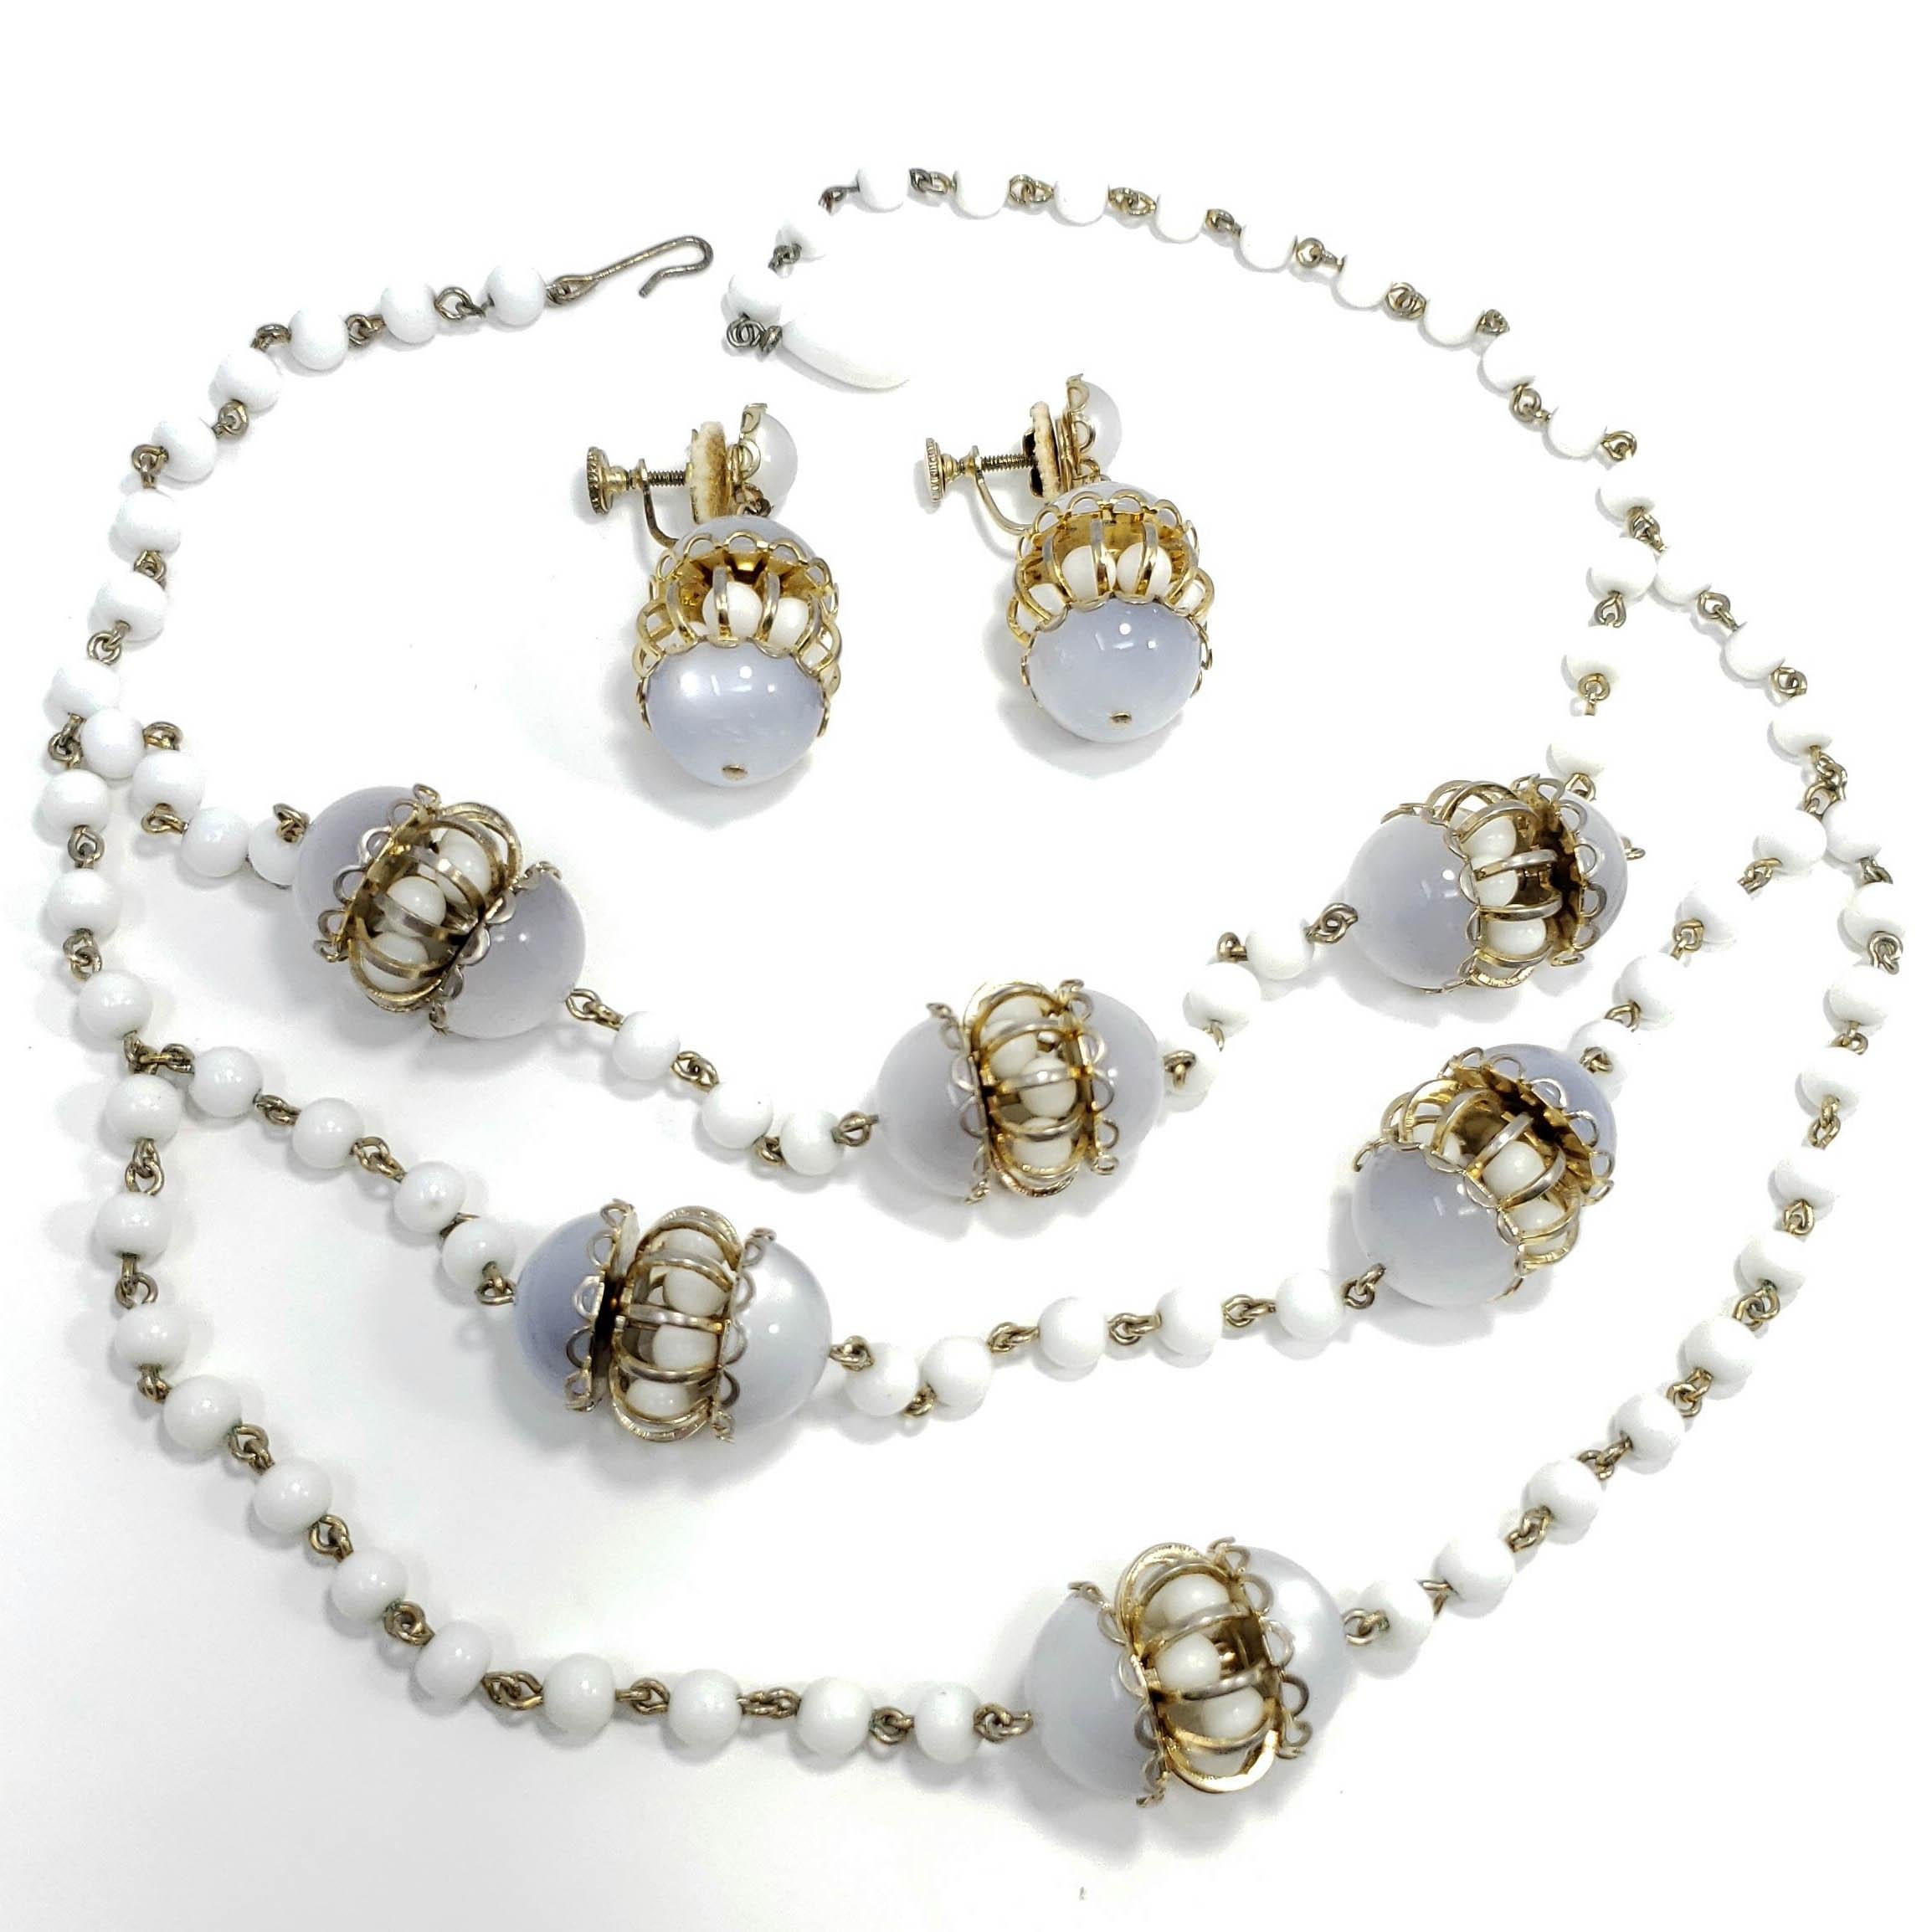 Matching moonglow lucite and milk glass bead multi-strand necklace and earring set. The necklace features decorative lucite and milk glass chamber charms set on a multi-strand milk glass bead necklace. Each earring features a matching charm, set on